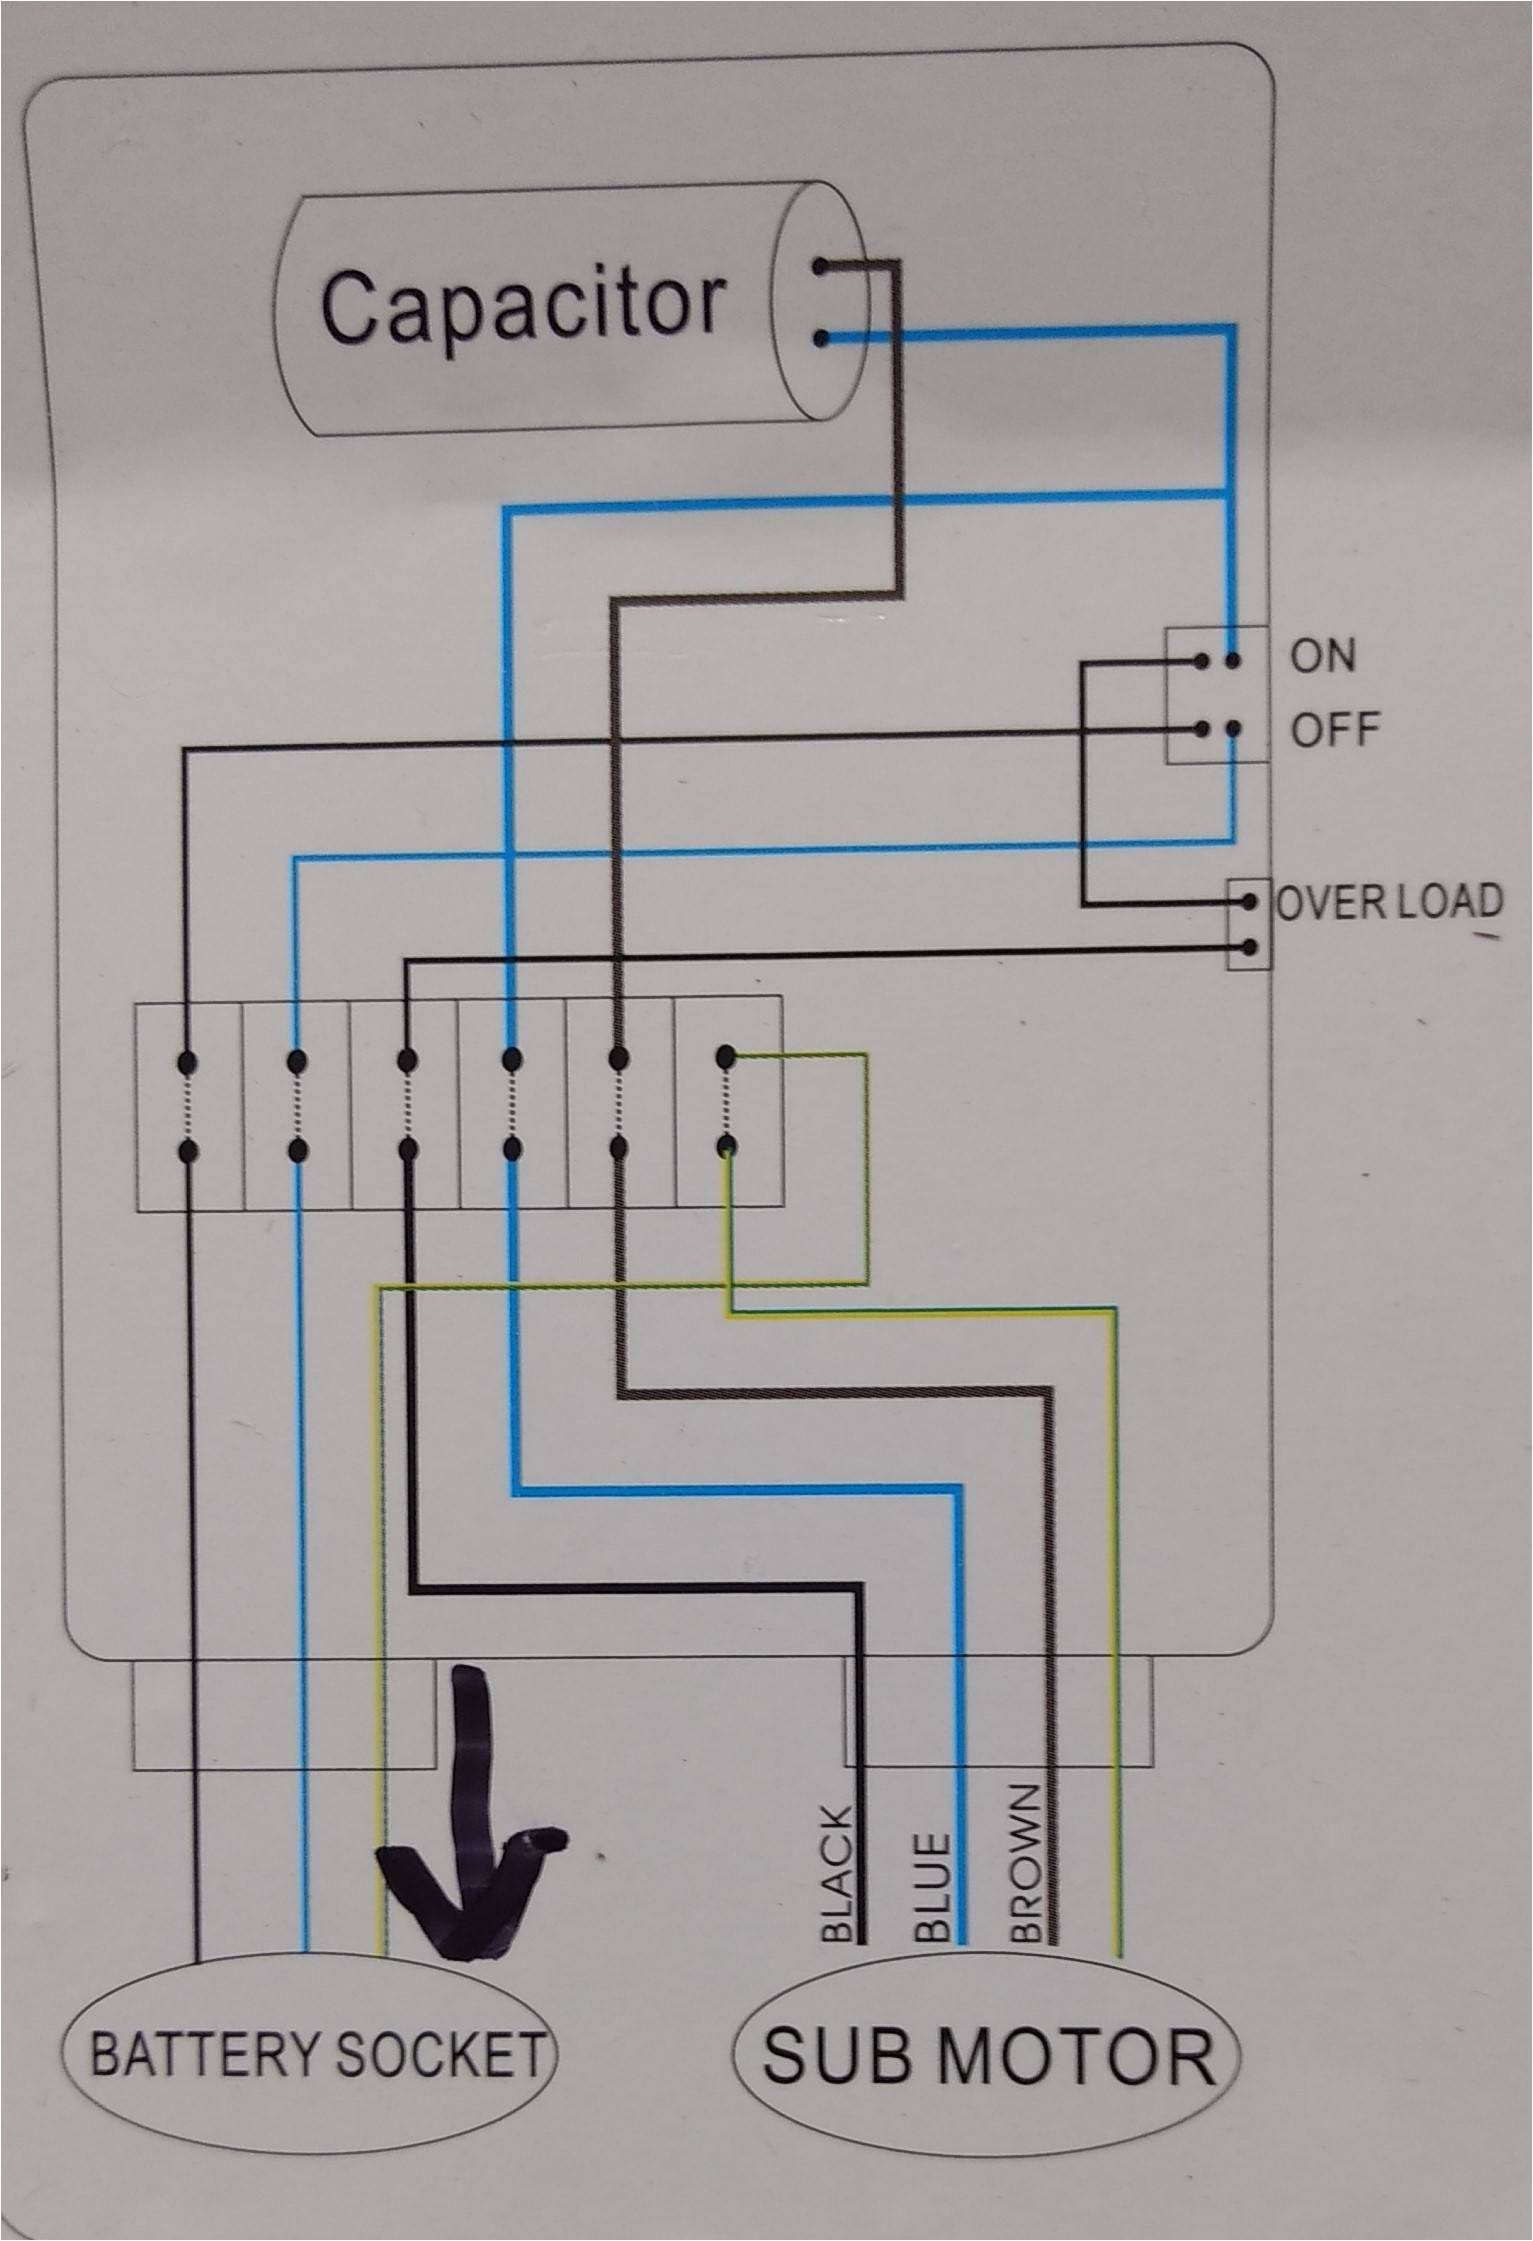 diagram as well submersible pump wiring further submersible pump fw water pump wiring diagram